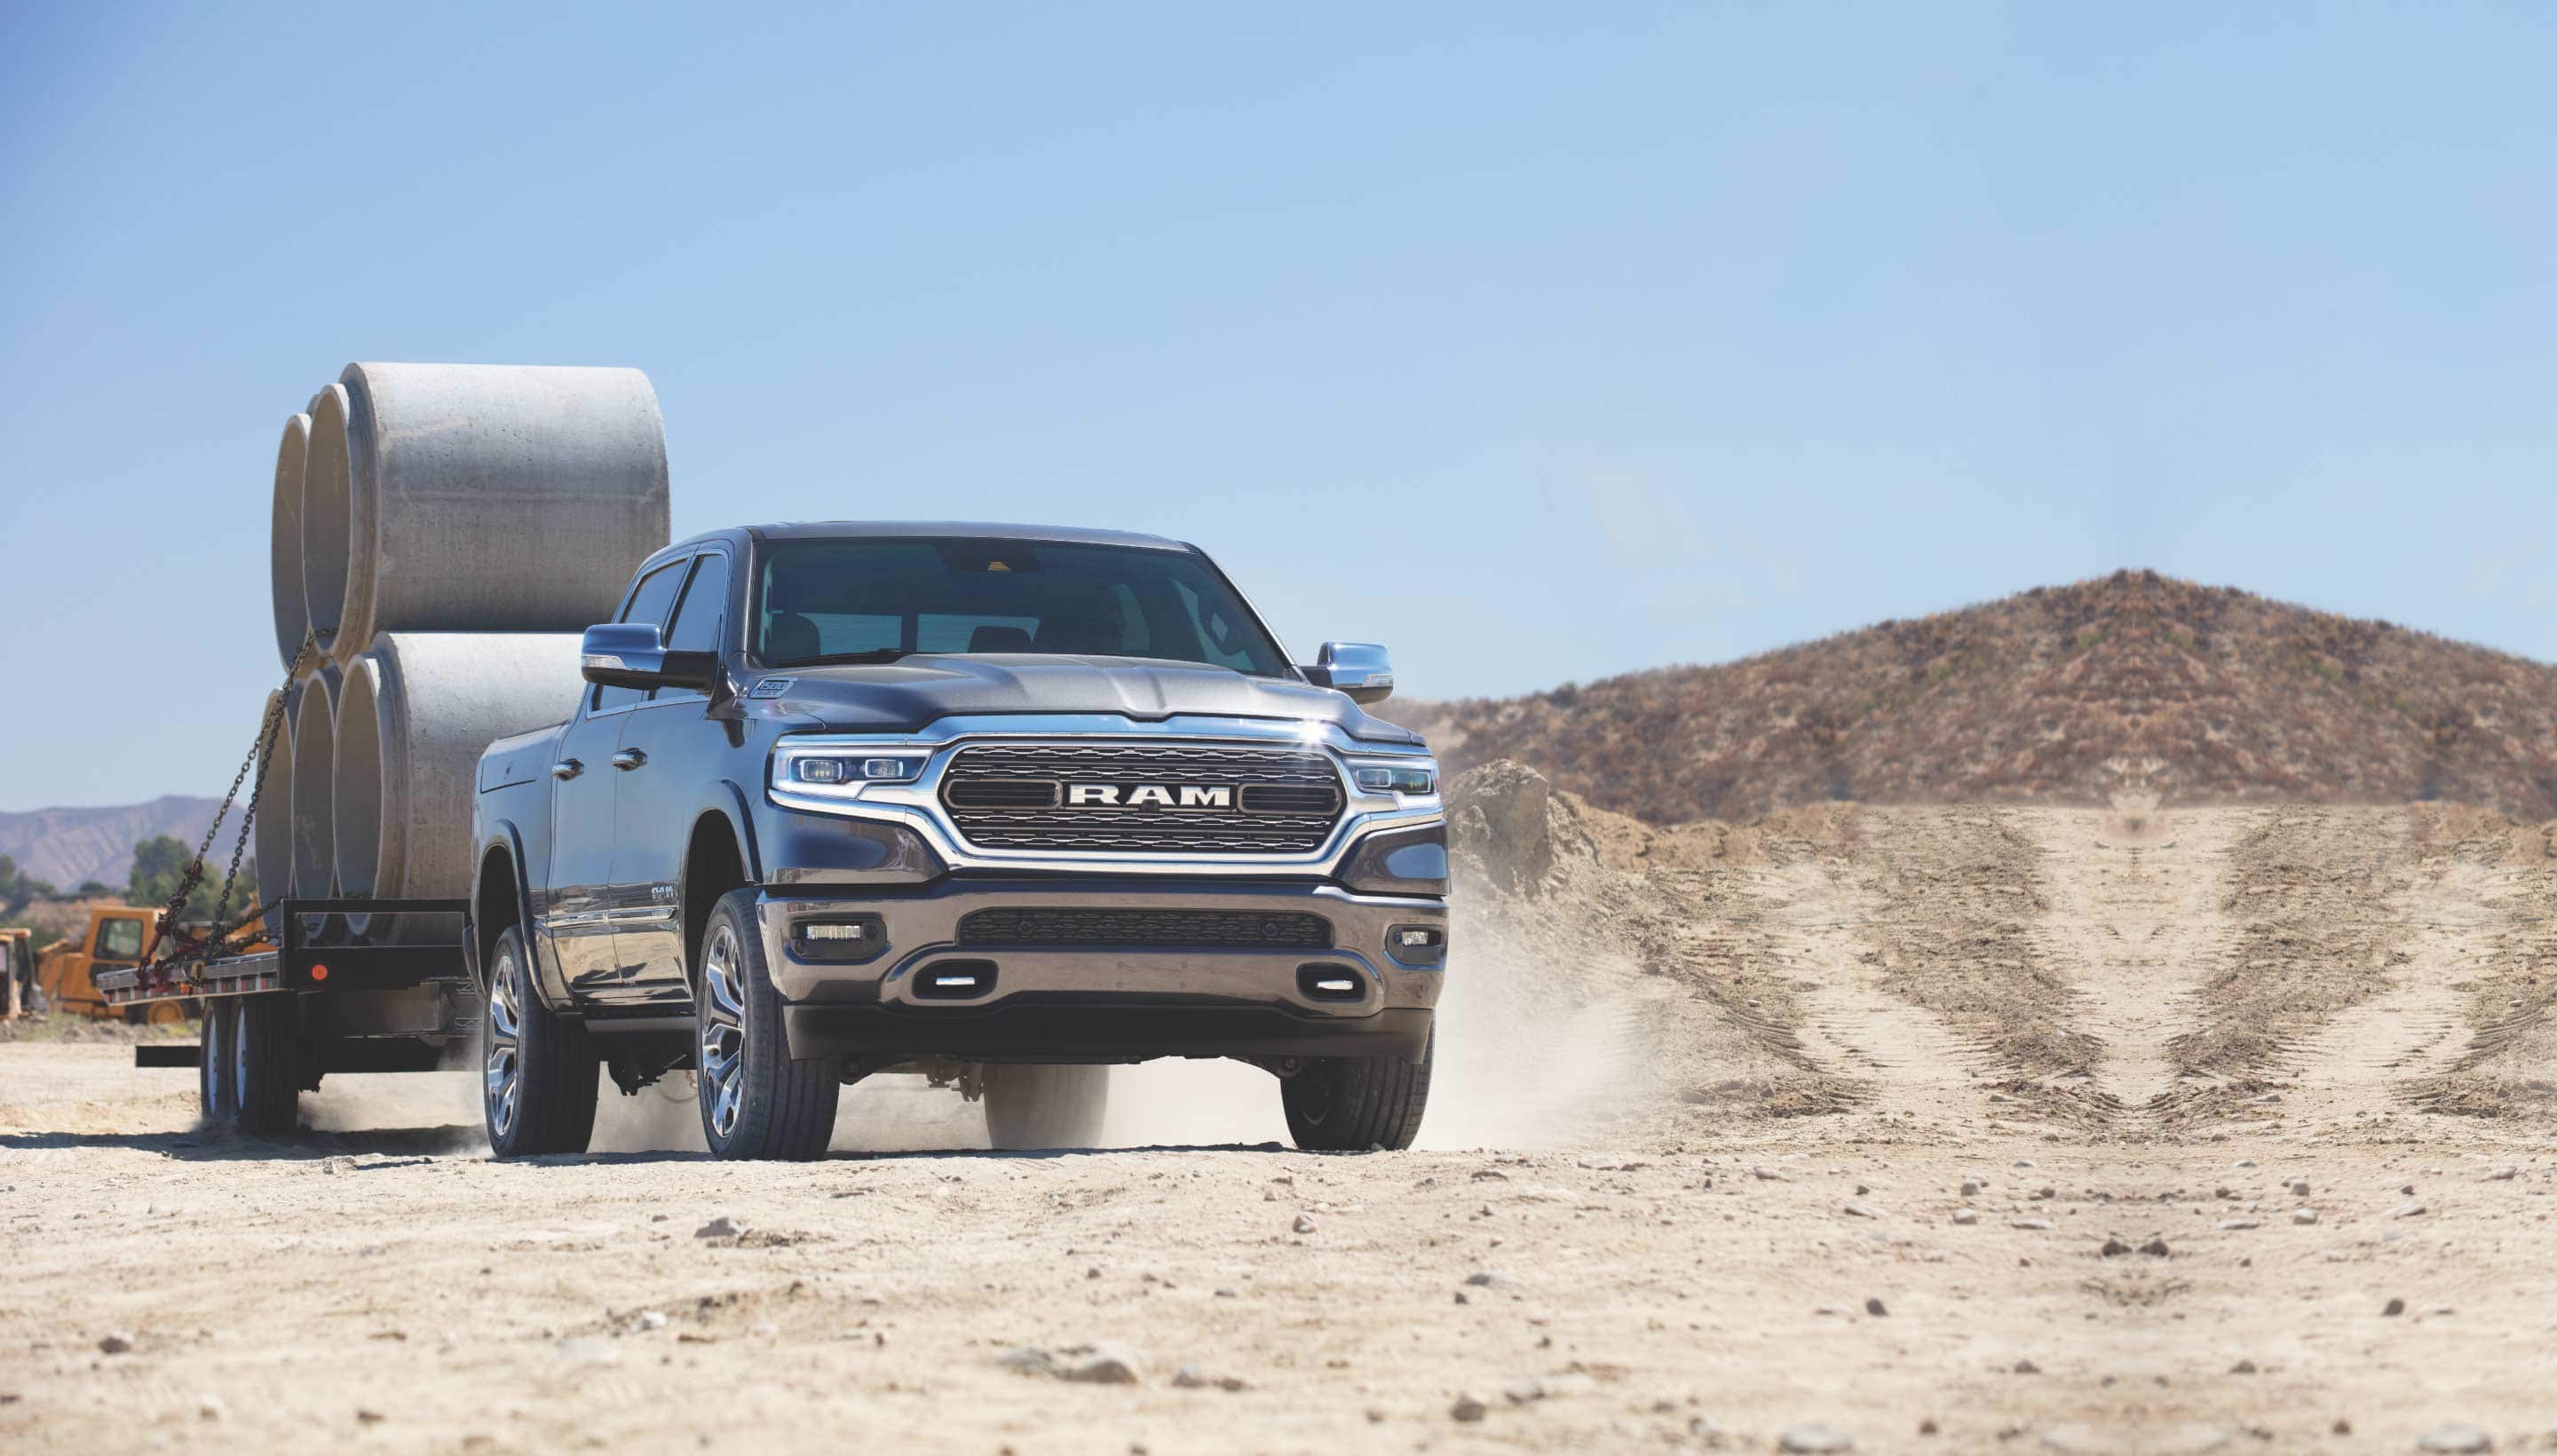 A 2022 Ram 1500 on a construction site towing a trailer stacked with concrete forms.